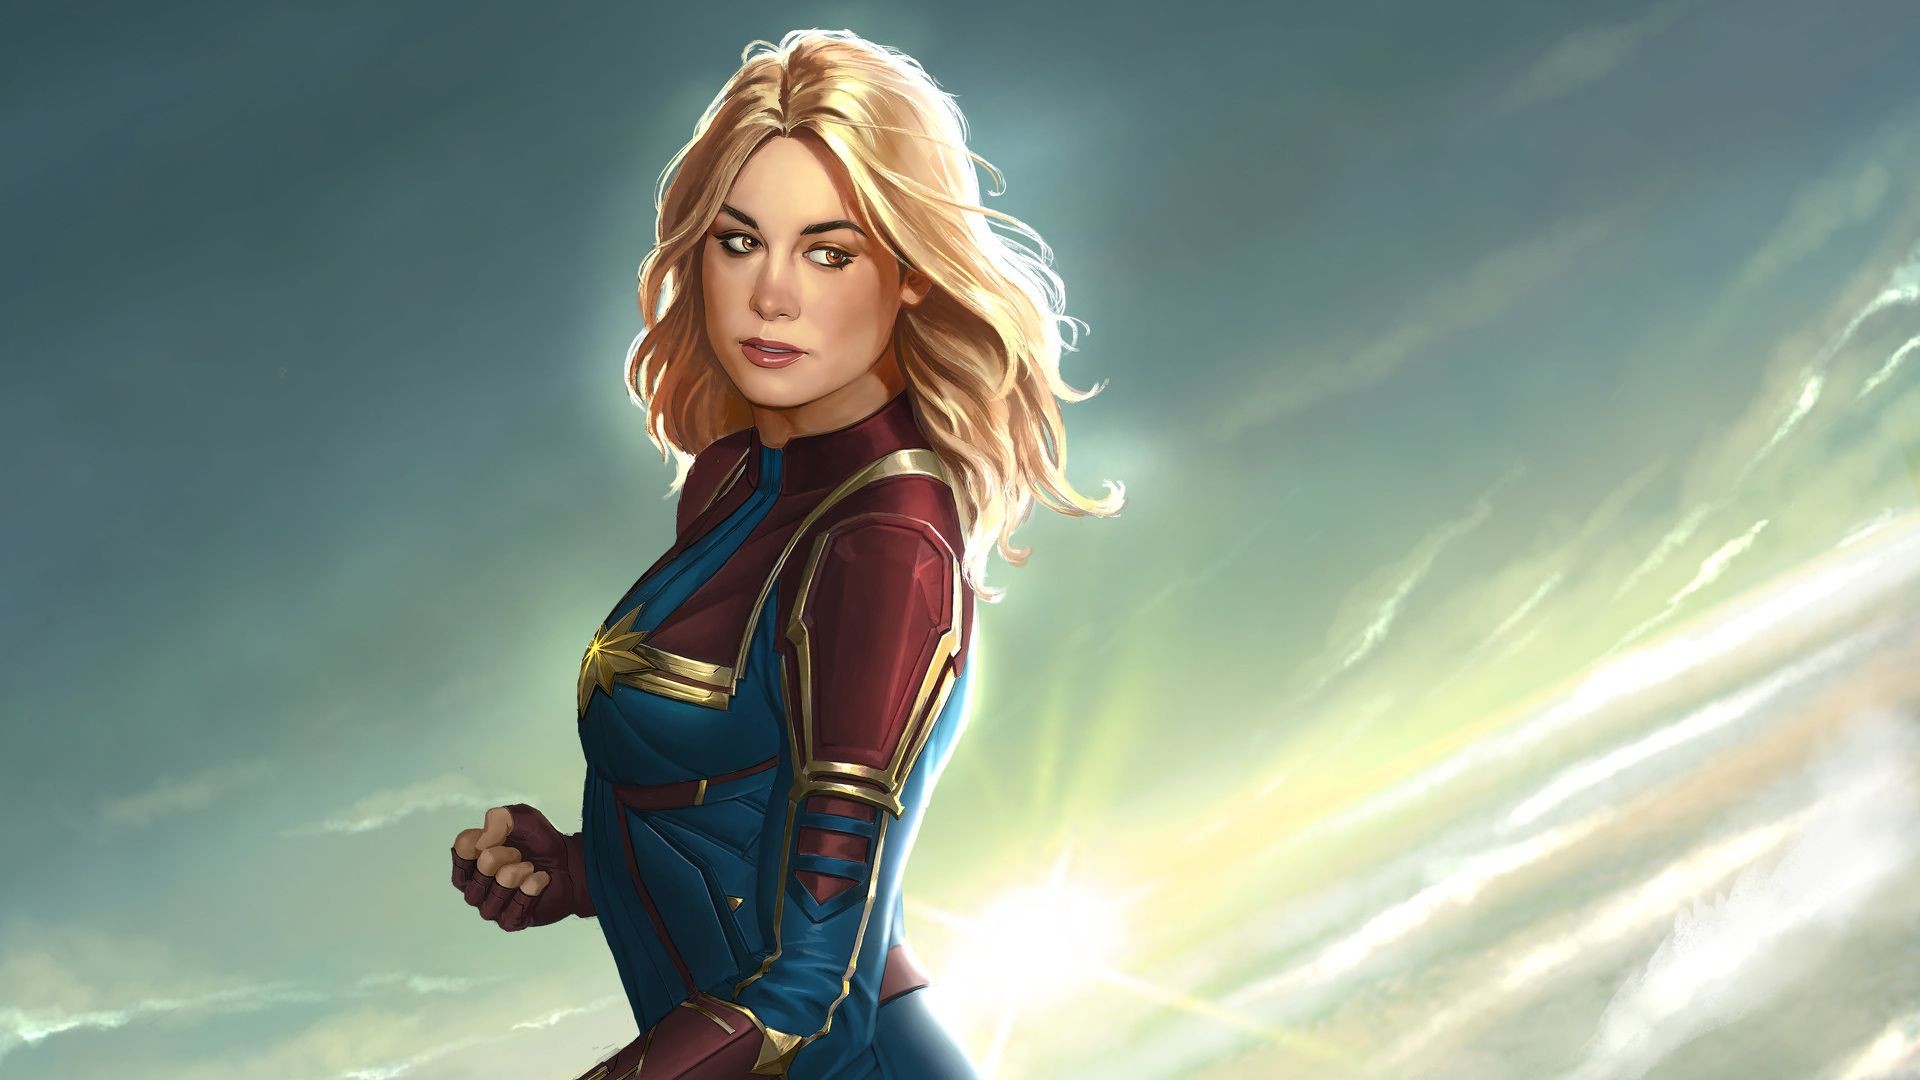 Captain Marvel 2019 Poster Wallpaper with high-resolution 1920x1080 pixel. You can use this poster wallpaper for your Desktop Computers, Mac Screensavers, Windows Backgrounds, iPhone Wallpapers, Tablet or Android Lock screen and another Mobile device